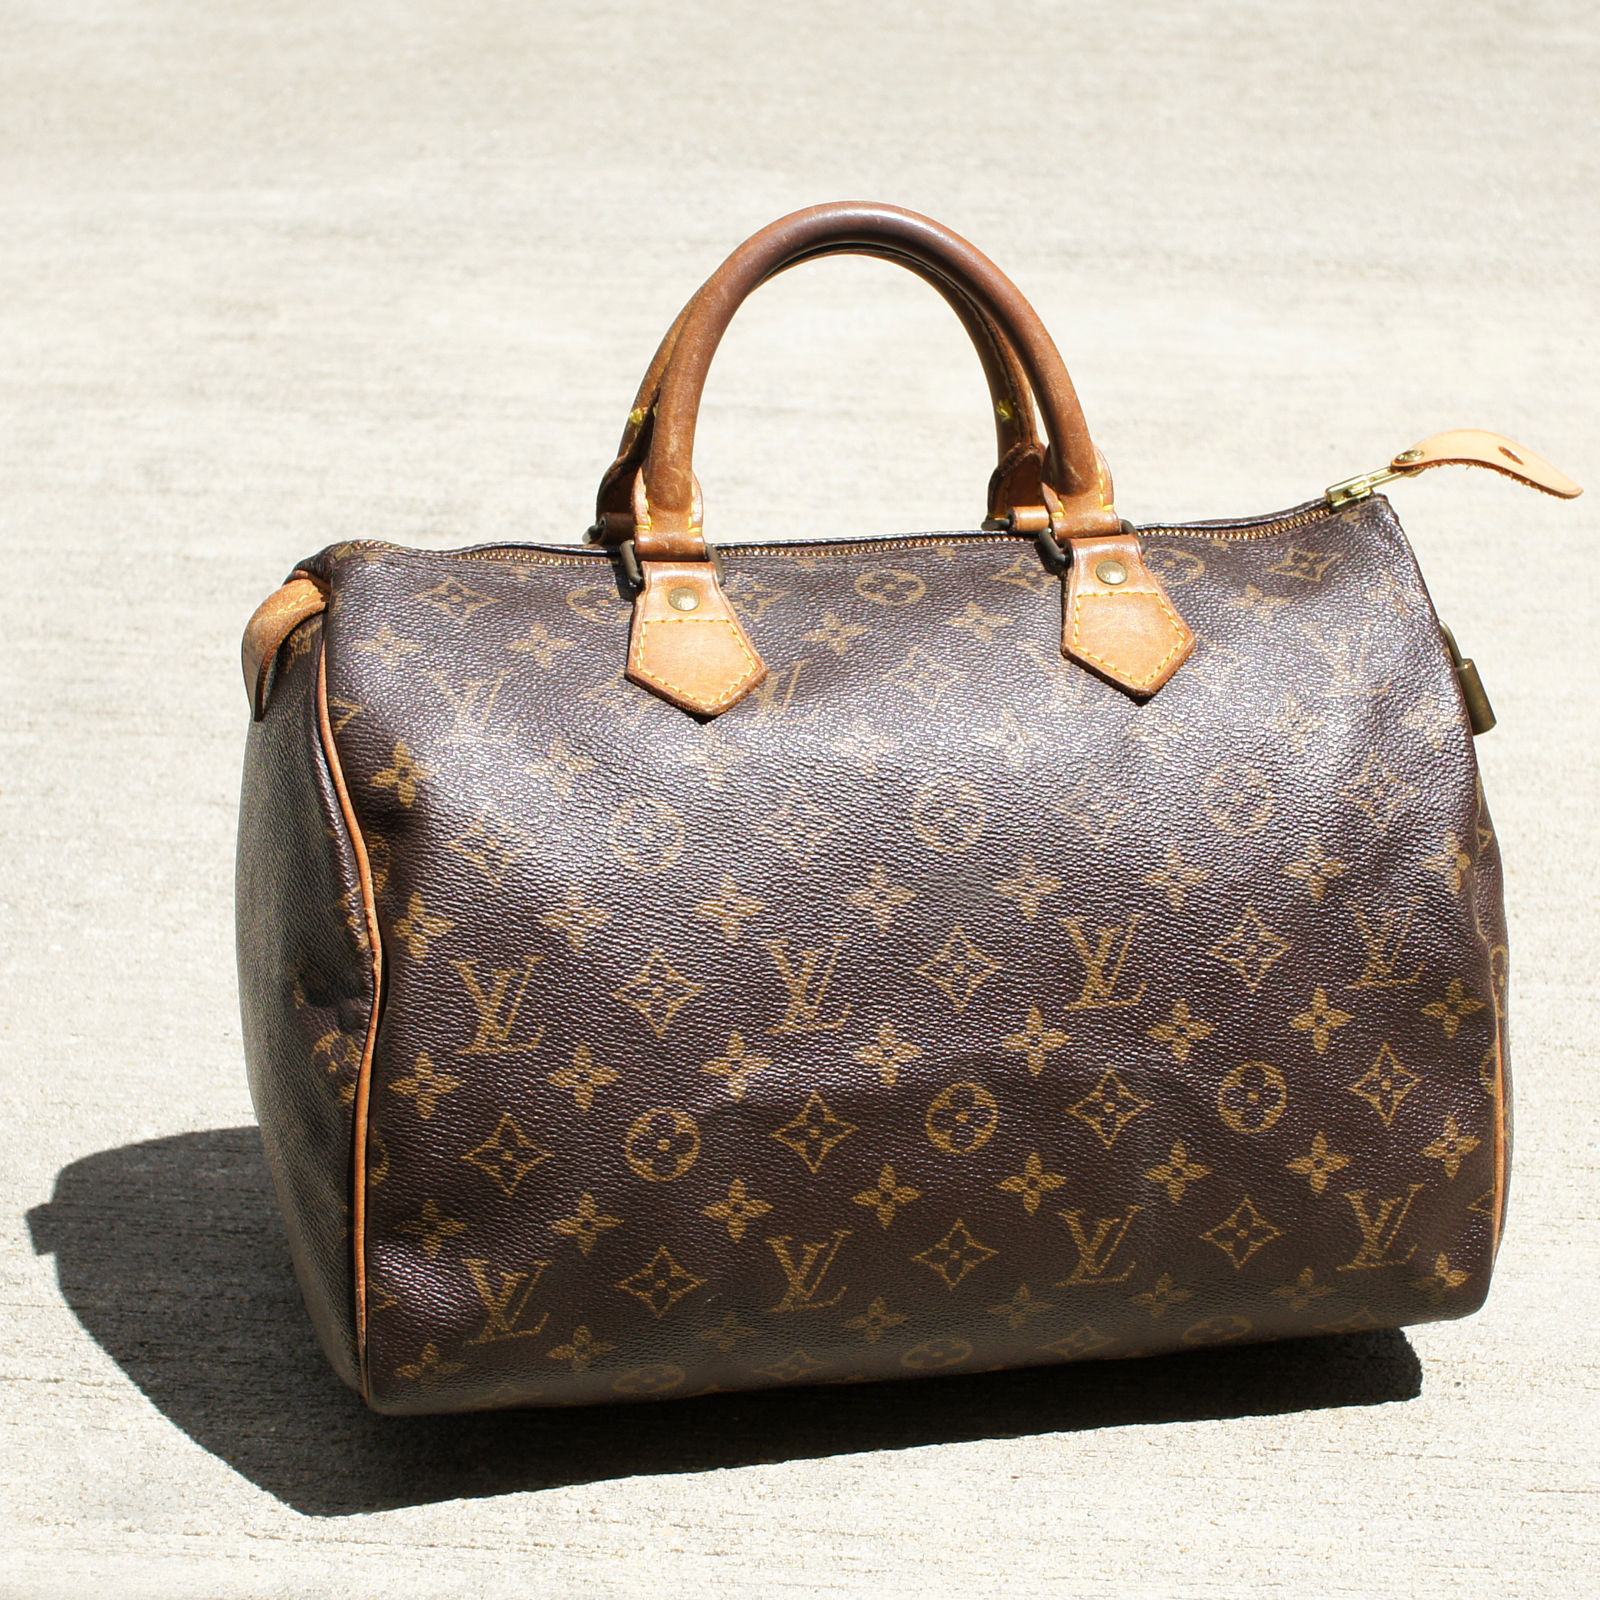 Vintage Louis Vuitton Price Guide | Literacy Ontario Central South